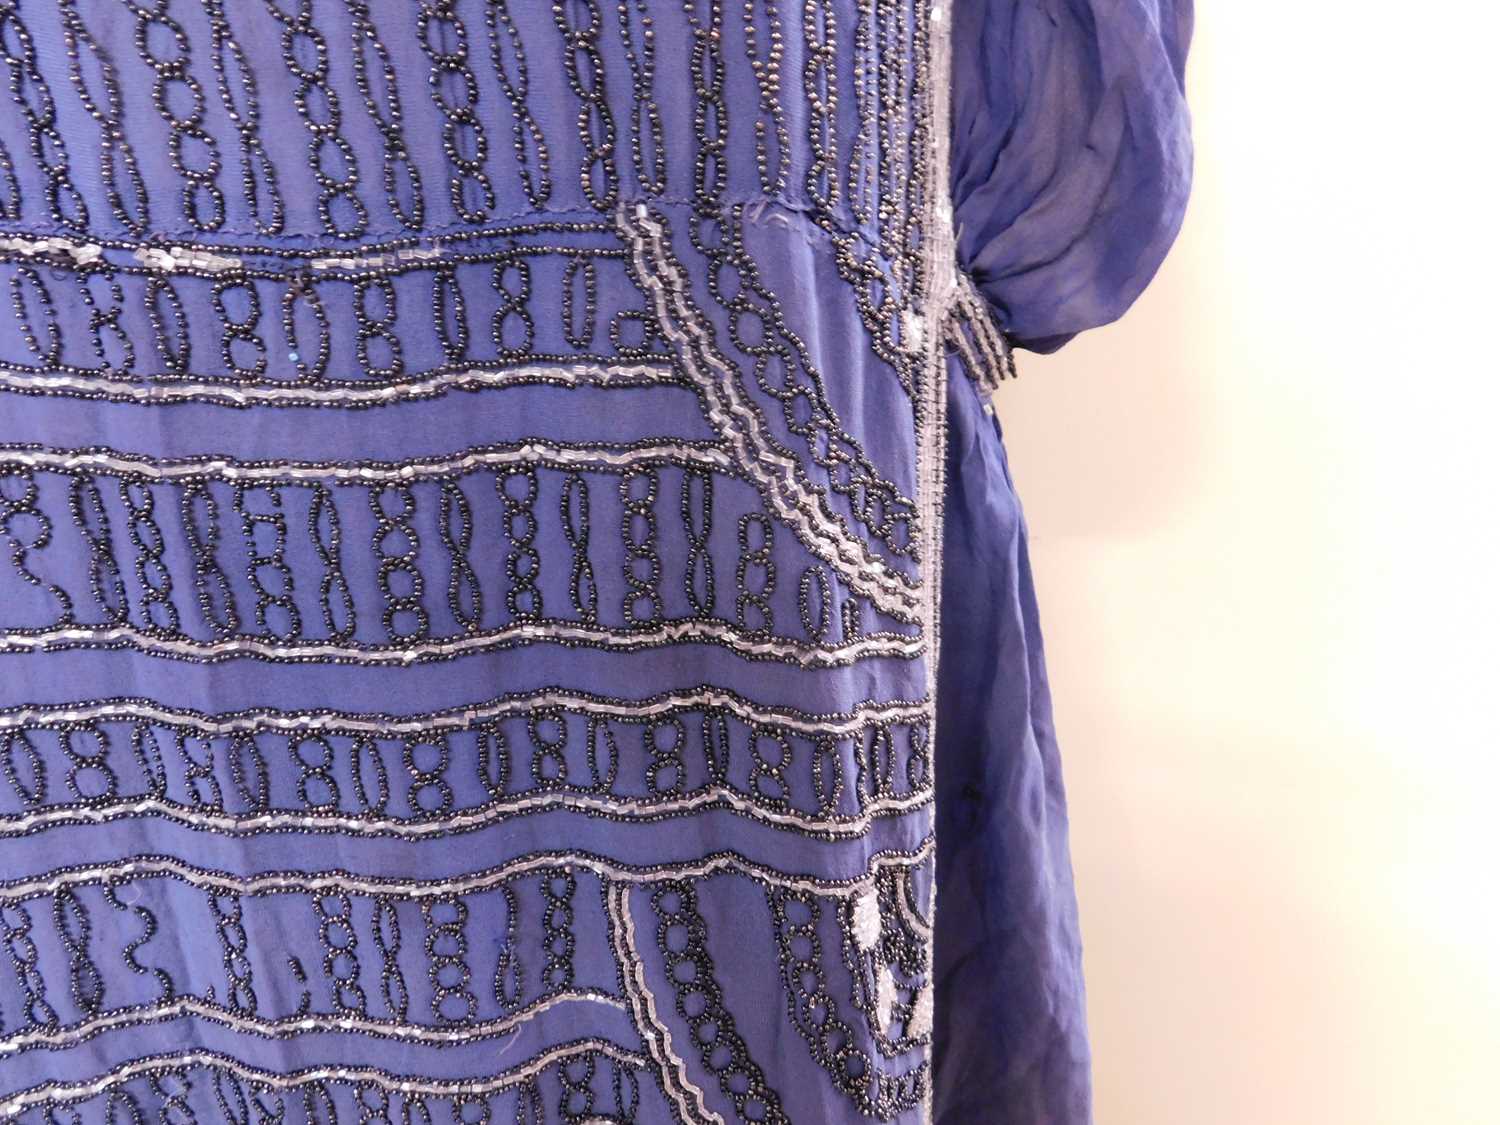 An Edwardian beaded dress, the blue chiffon dress with allover beaded detail, sleeveless - Image 6 of 14